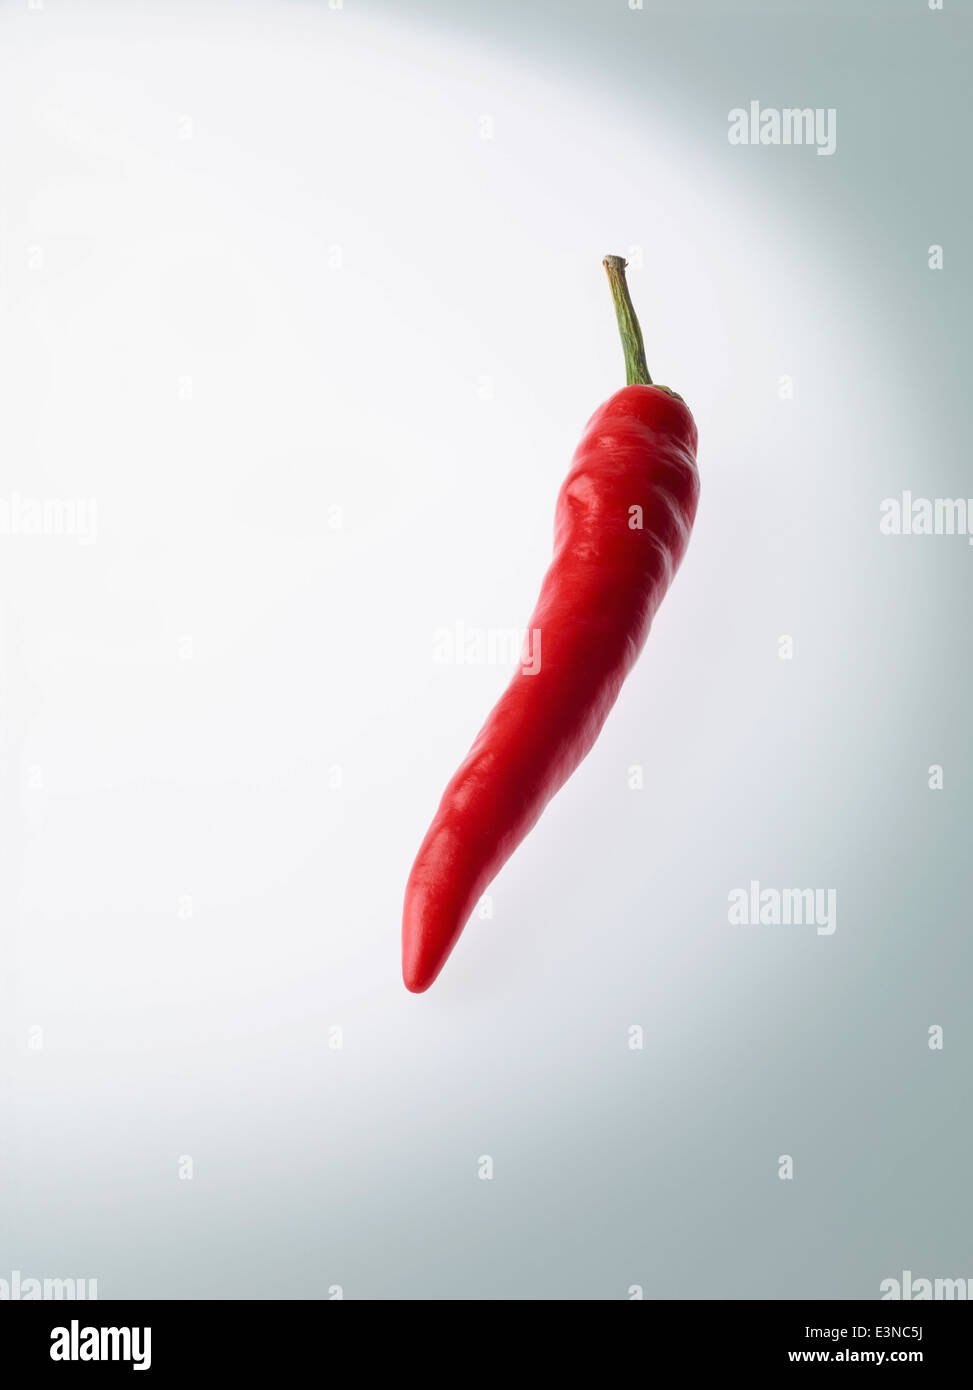 Red chili over gray background Stock Photo